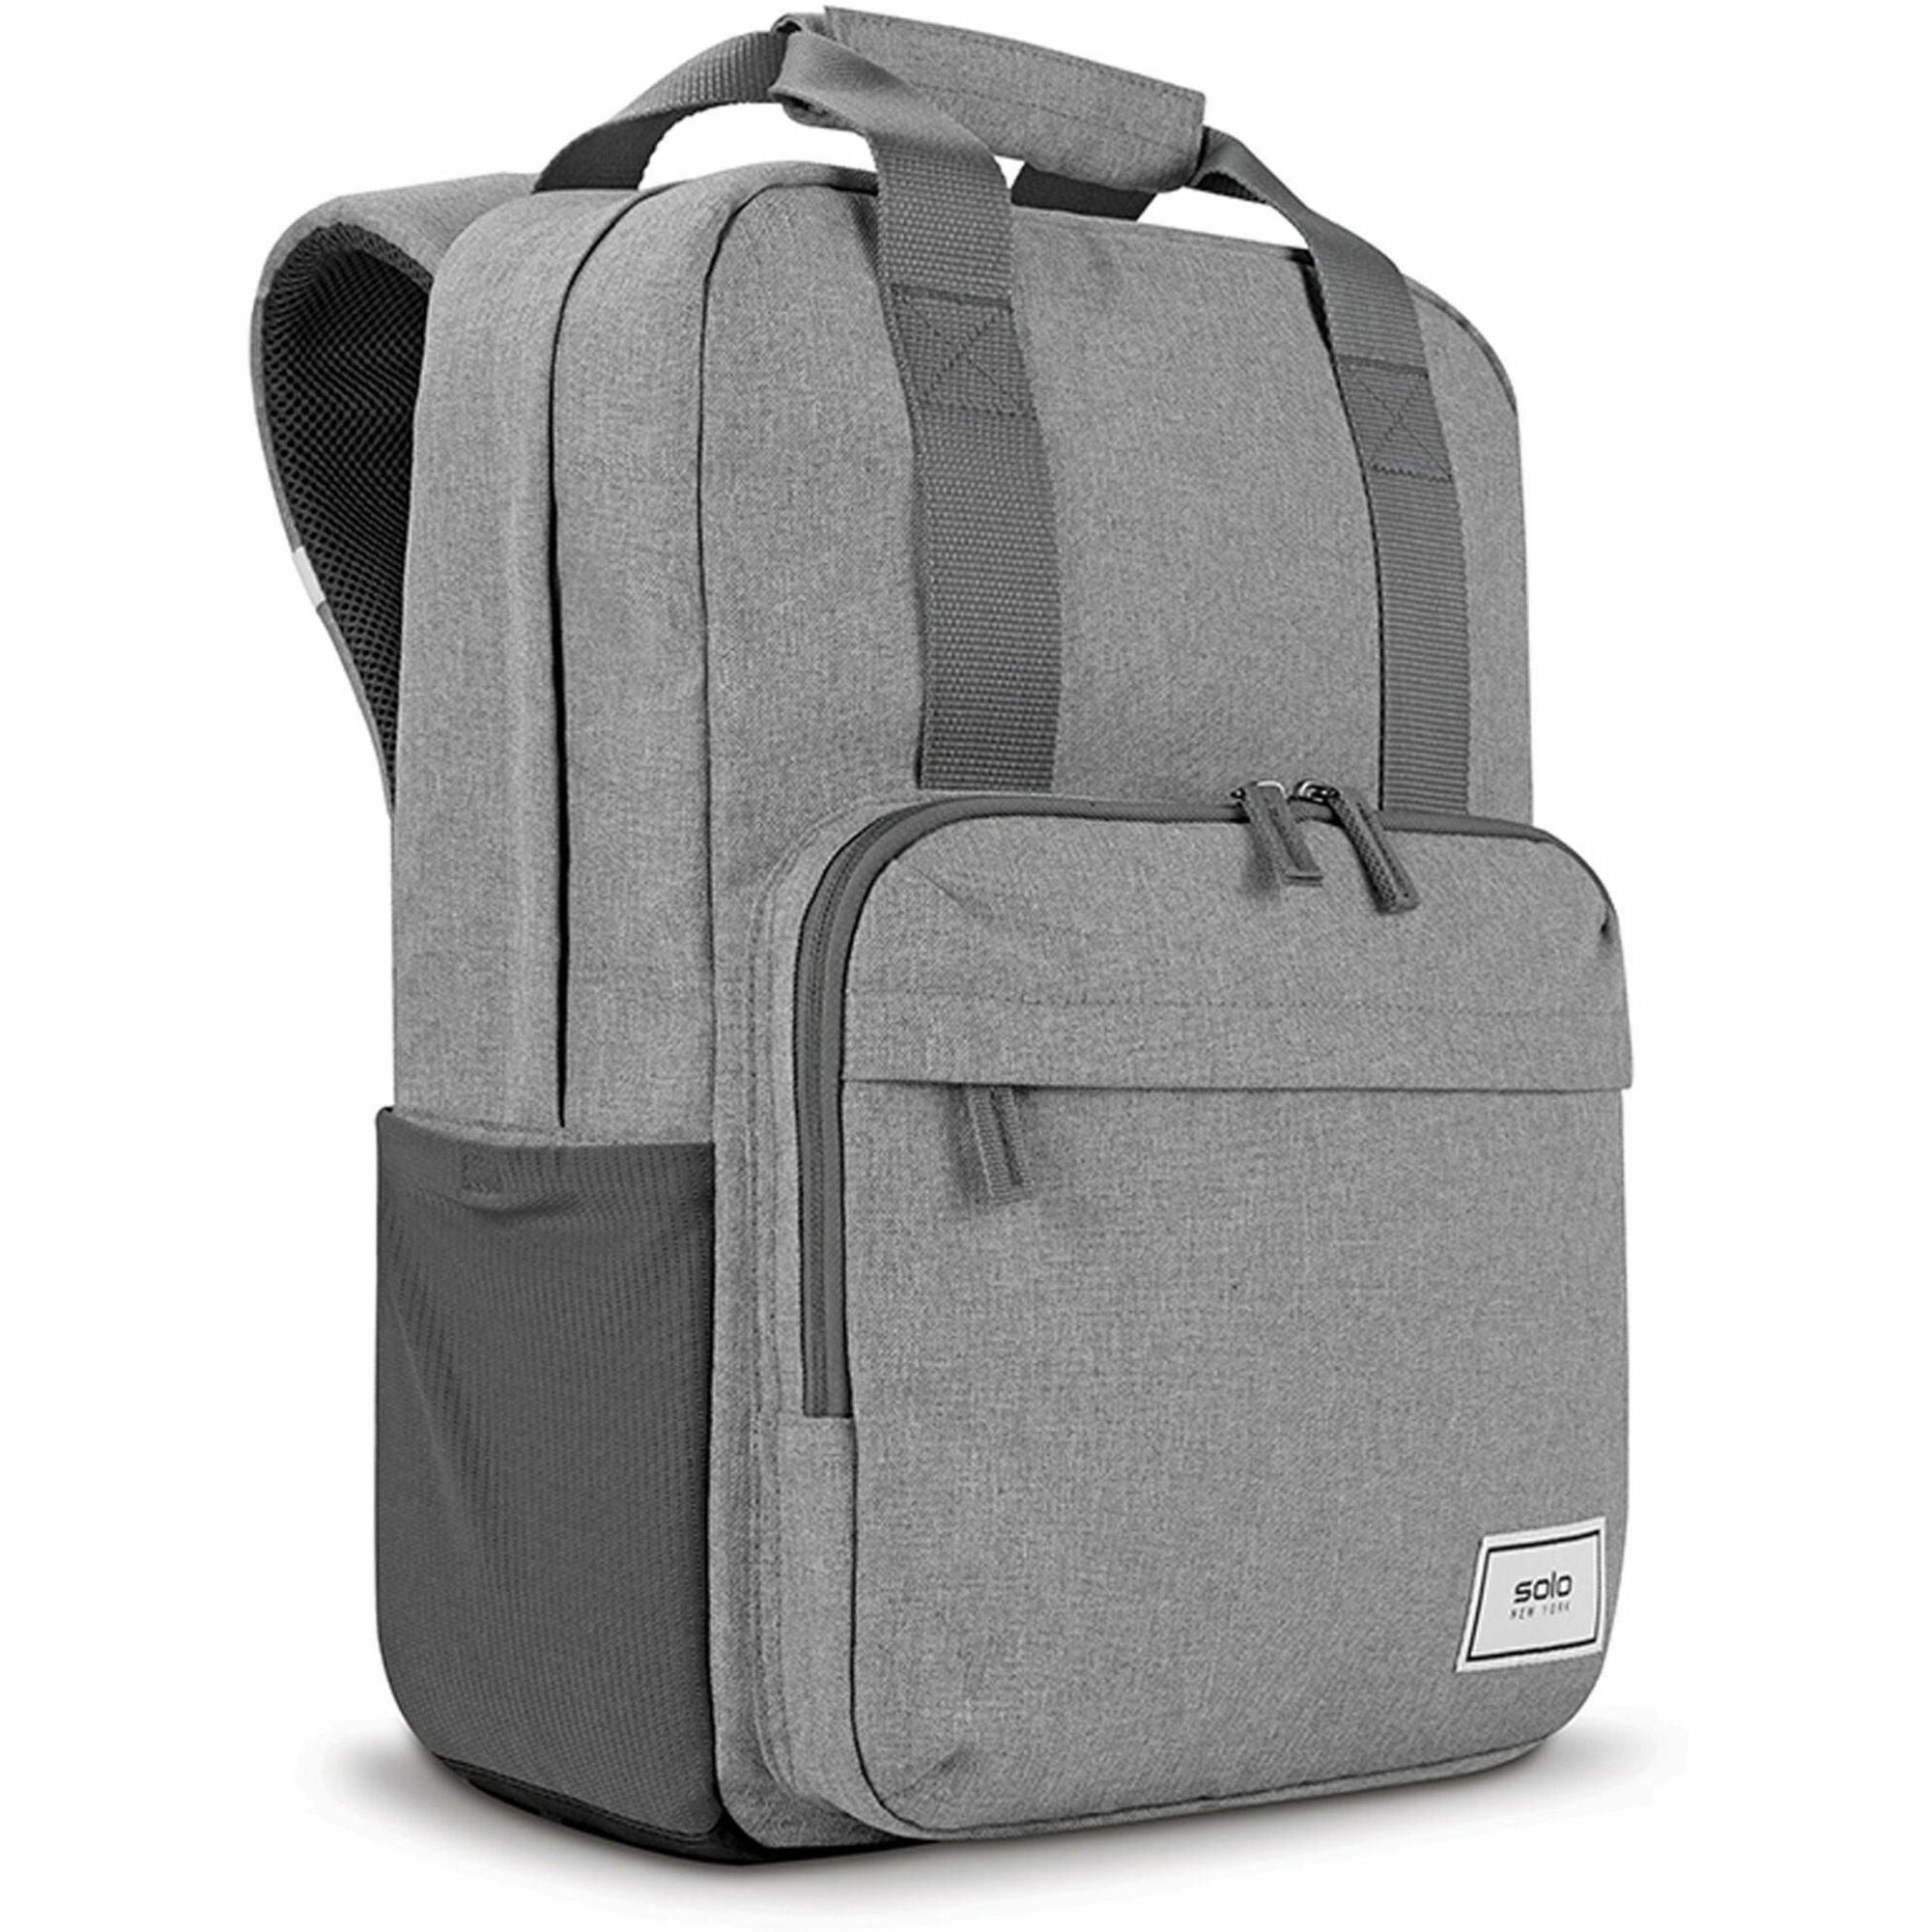 solo-reclaim-carrying-case-backpack-for-156-notebook-gray-bump-resistant-damage-resistant-shoulder-strap-luggage-strap-handle-165-height-x-123-width-x-68-depth-1-each_uslubn76010 - 1